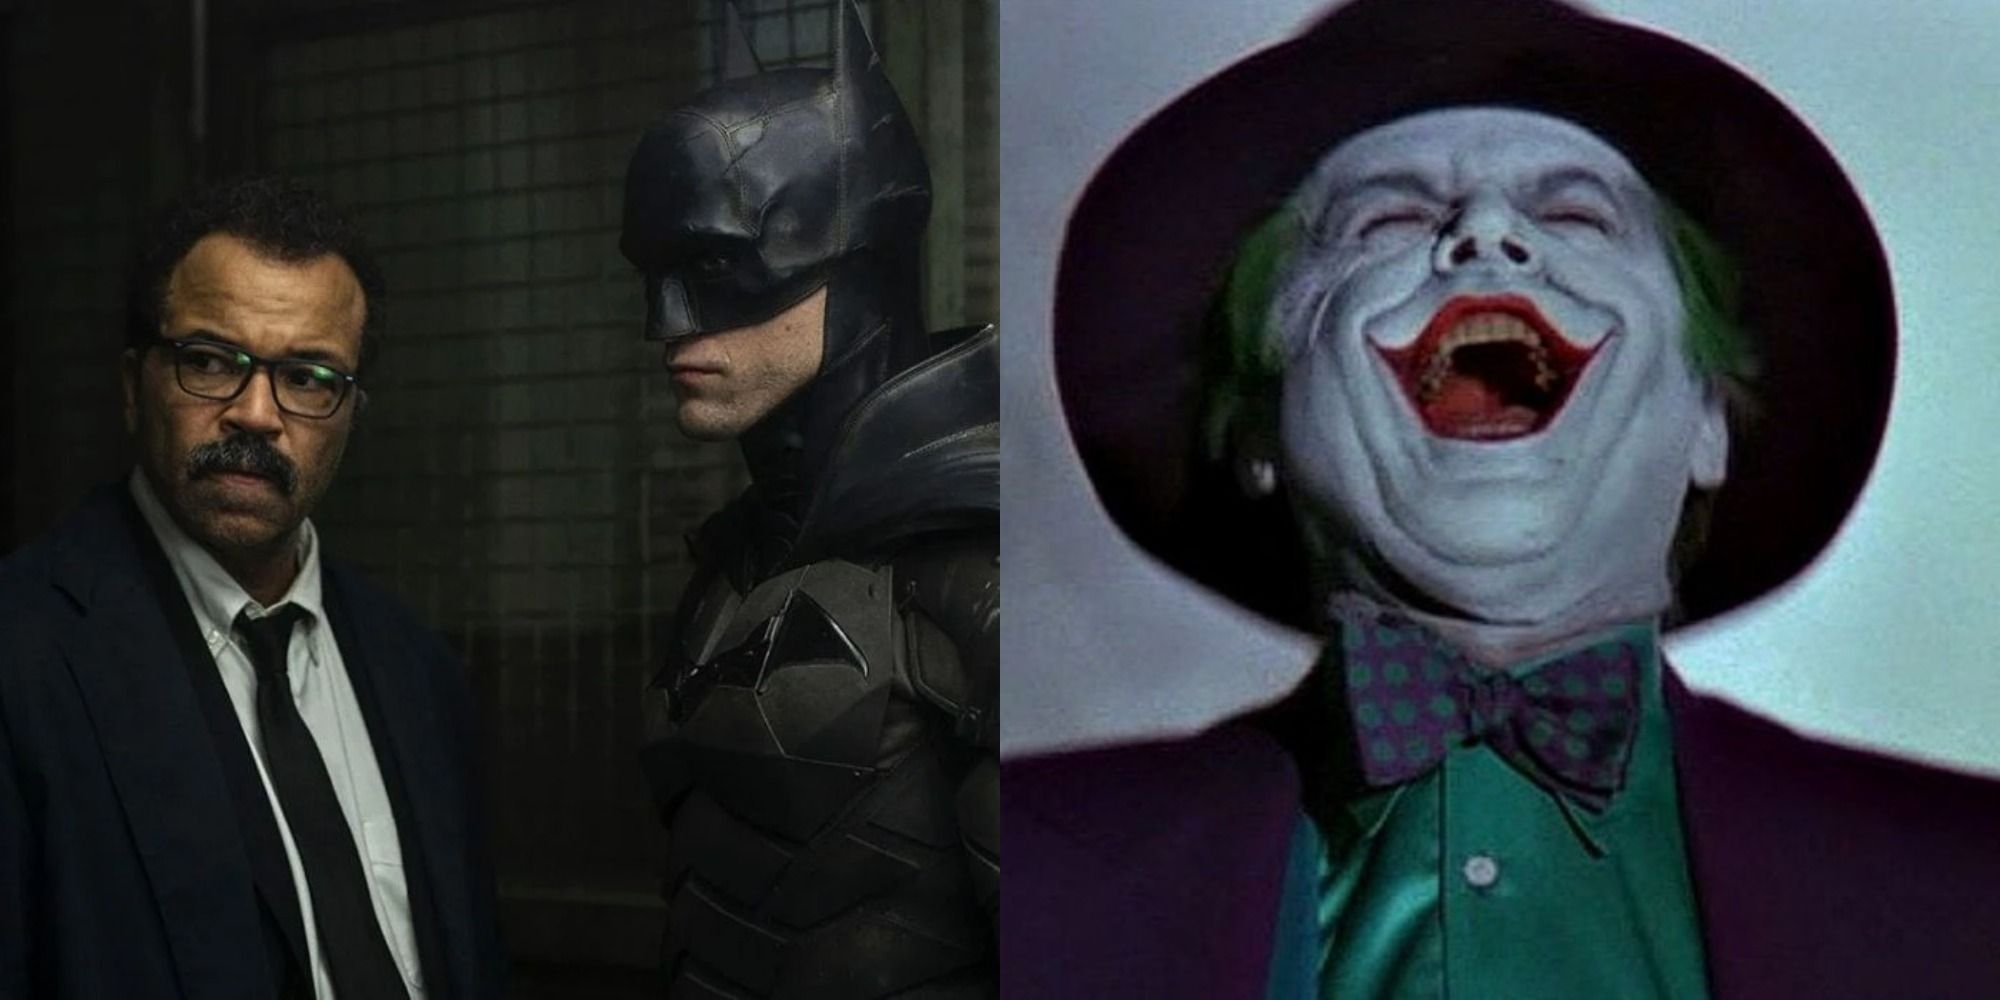 The 10 Funniest Quotes From Batman Movies